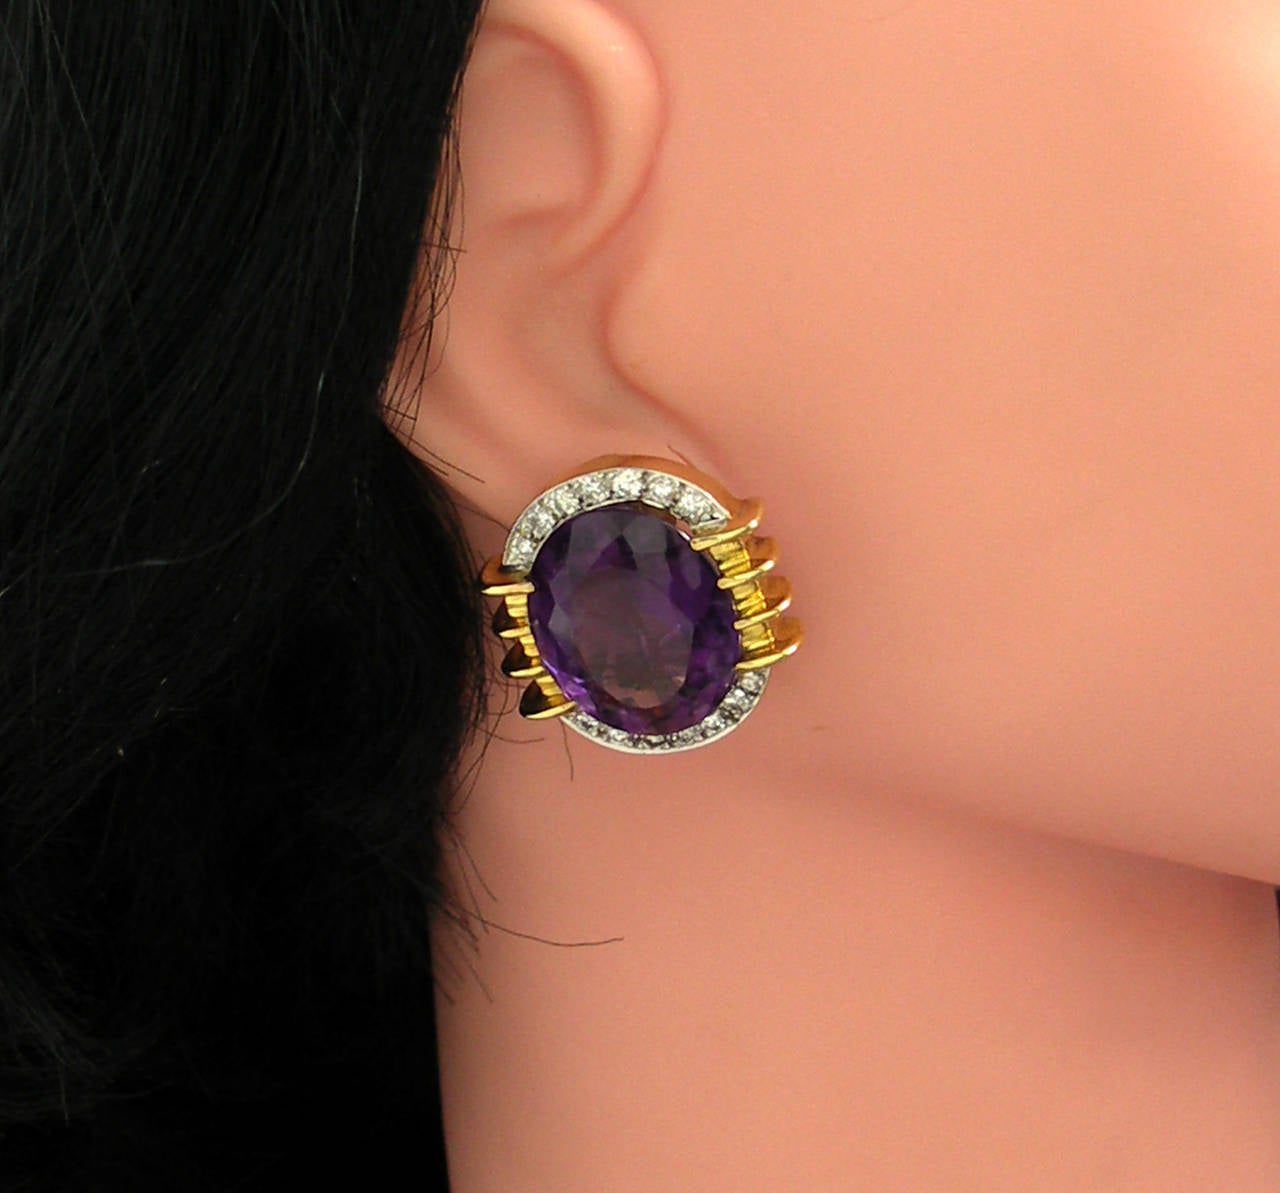 A modernistic pair of 18K yellow gold earrings, signed MB. Each earring is centered around an approximately 20ct faceted oval amethyst, flanked by retro style on the left and right; and by pave' set diamonds on the top and bottom. Overall diamond